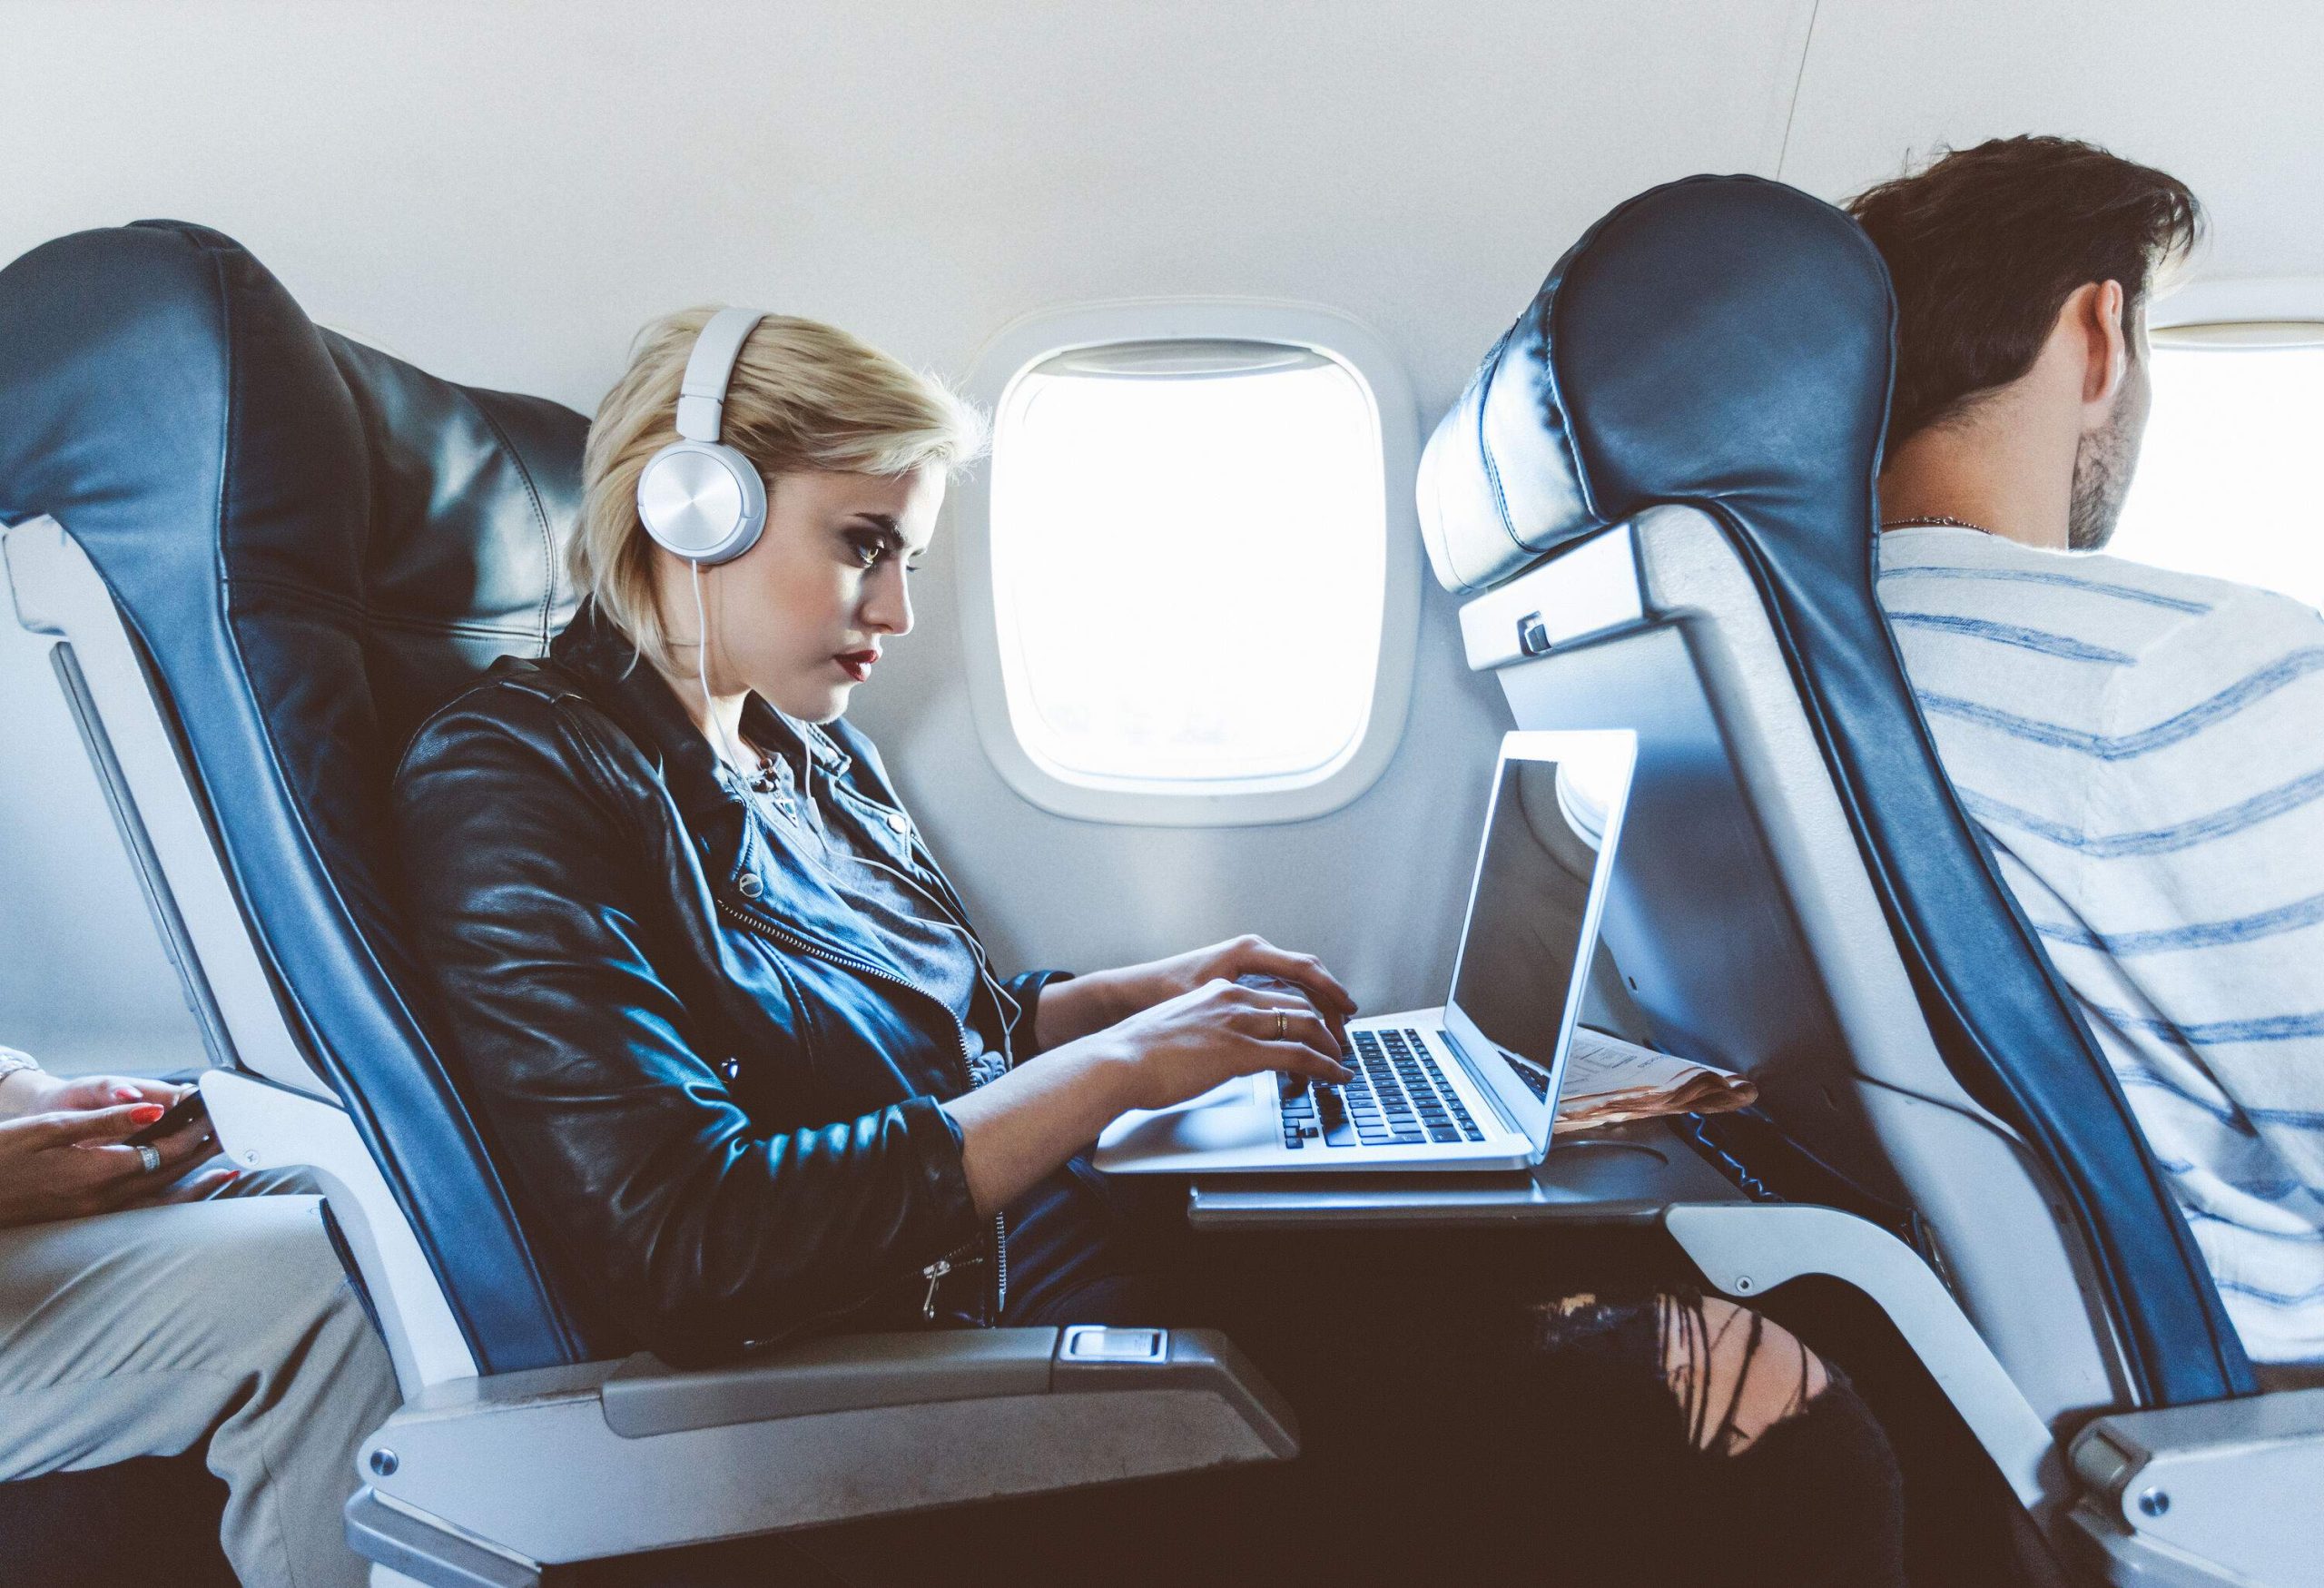 A female traveller on a flight, engrossed in her work, using a laptop computer, and wearing headphones.